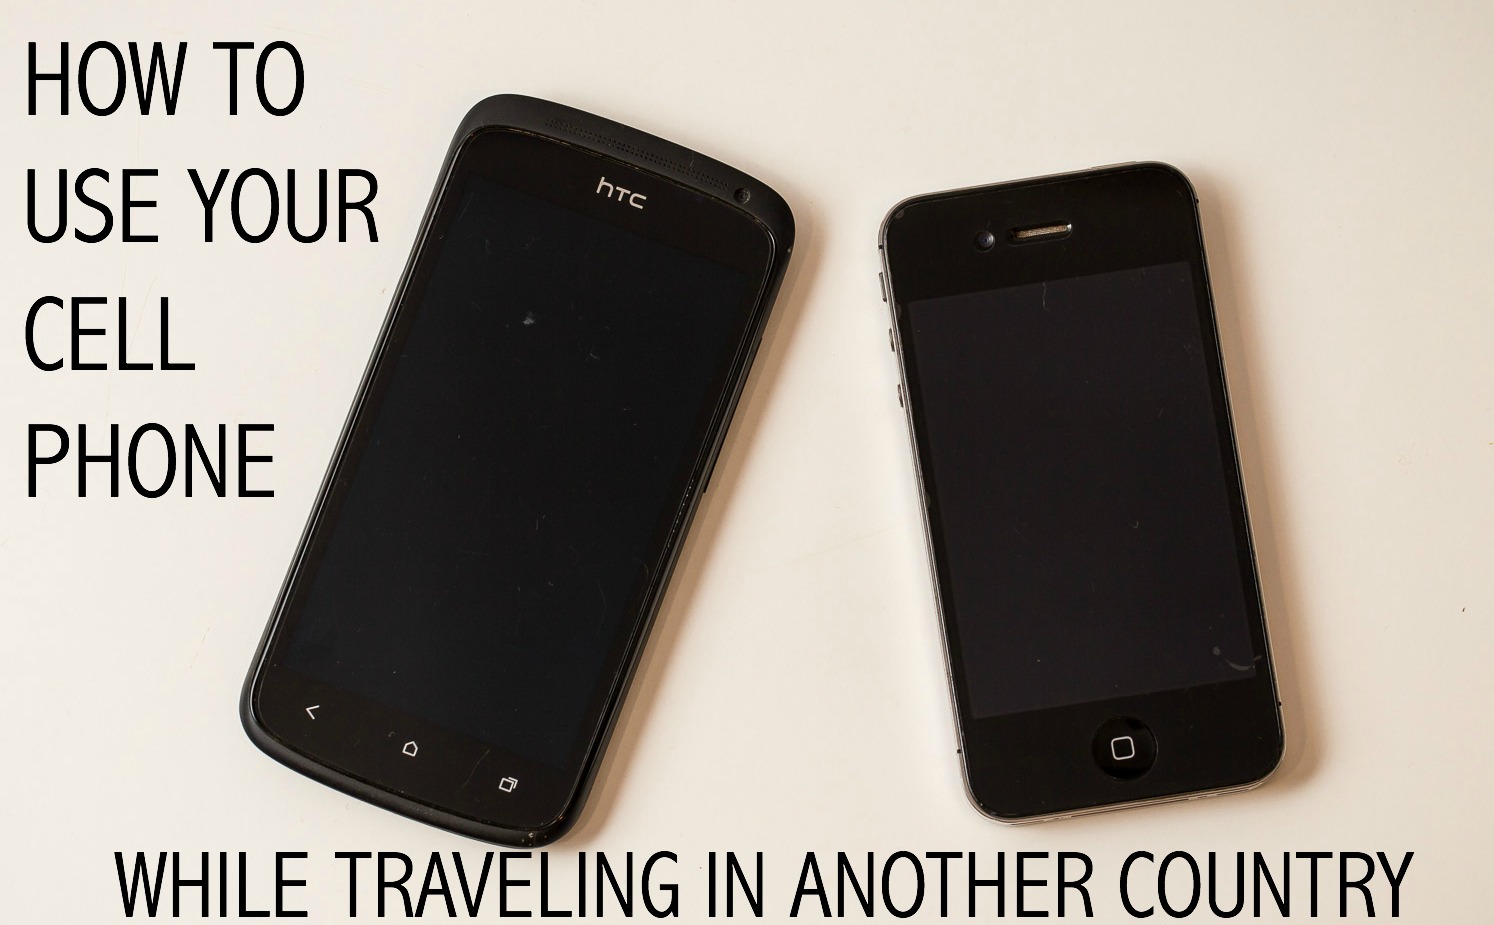 Can I take my cell phone to another country?